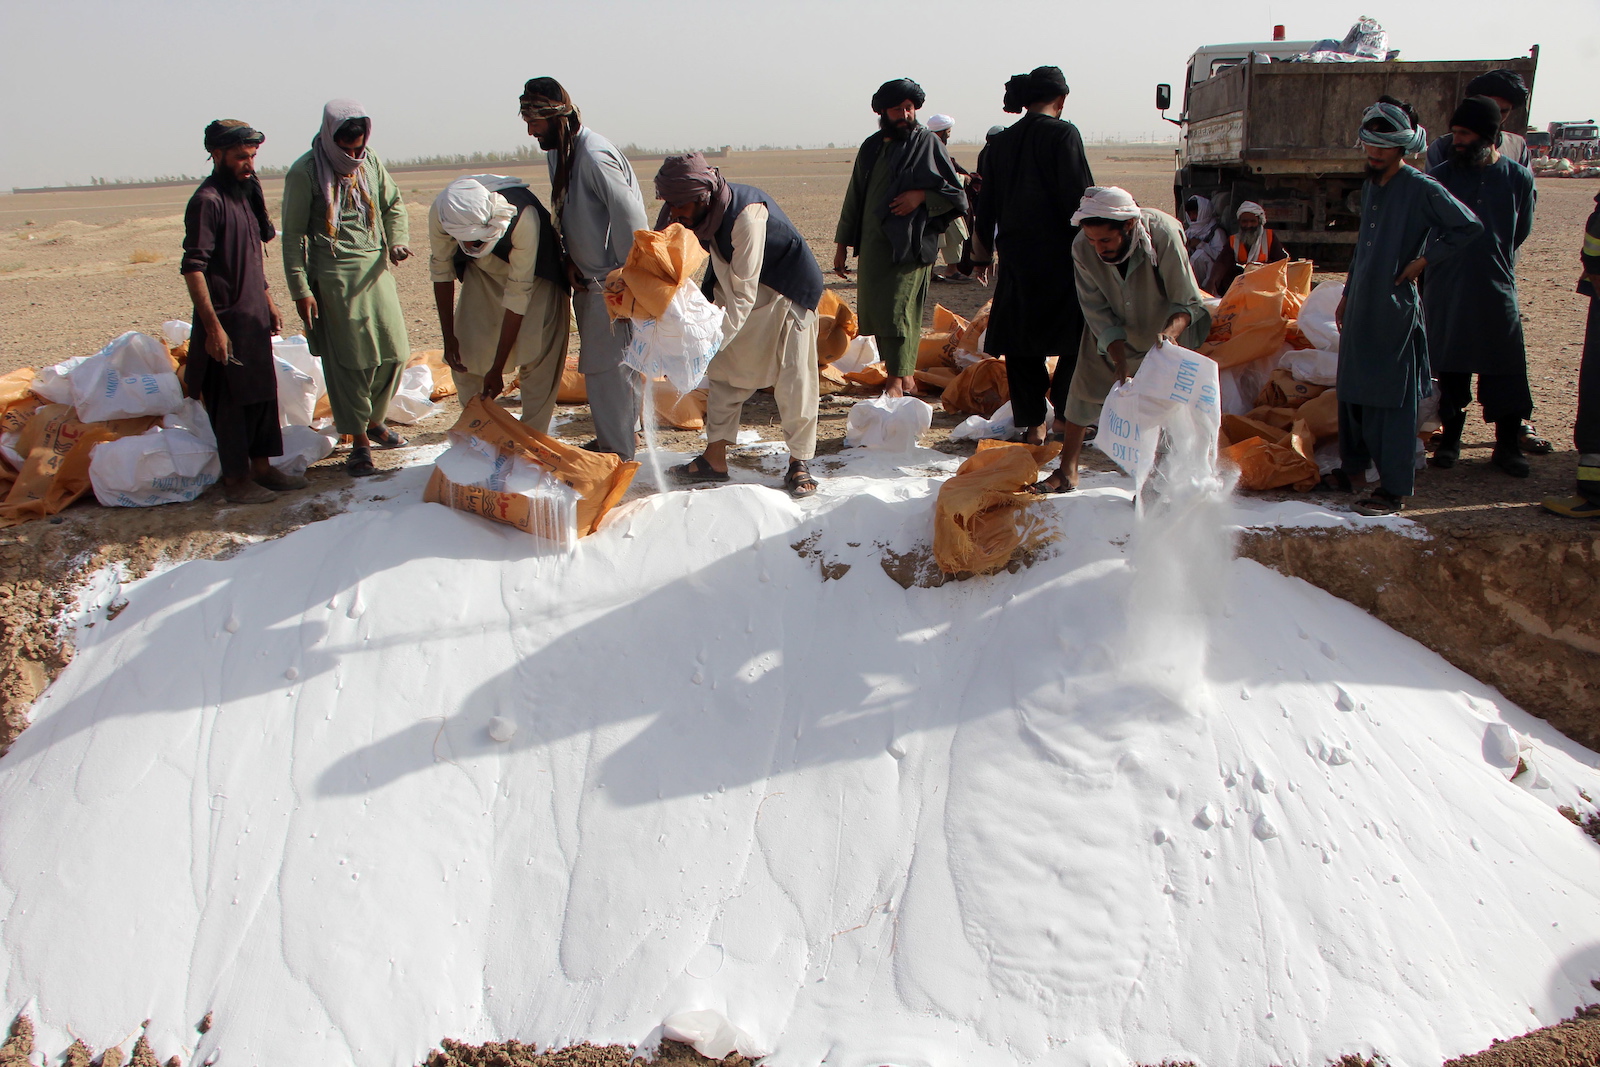 epa10845174 Afghani officials destroy narcotics and illegal substances during a ceremony in Kandahar, Afghanistan, 06 September 2023. Taliban authorities under the anti-narcotics management of the Security Command in Kandahar destroyed 29,385 kgs of various narcotics. Taliban leader Sheikh Haibatullah Akhund oversaw the disposal of 12 types of drugs at the Kandahar Police Headquarters, including 260 kg of heroin, 182 kg of glass drug, 1,776 kg of hashish, 108 kg of morphine, 4.66 kg of tablets and 635 liters of alcoholic beverages among other items.  EPA/STRINGER